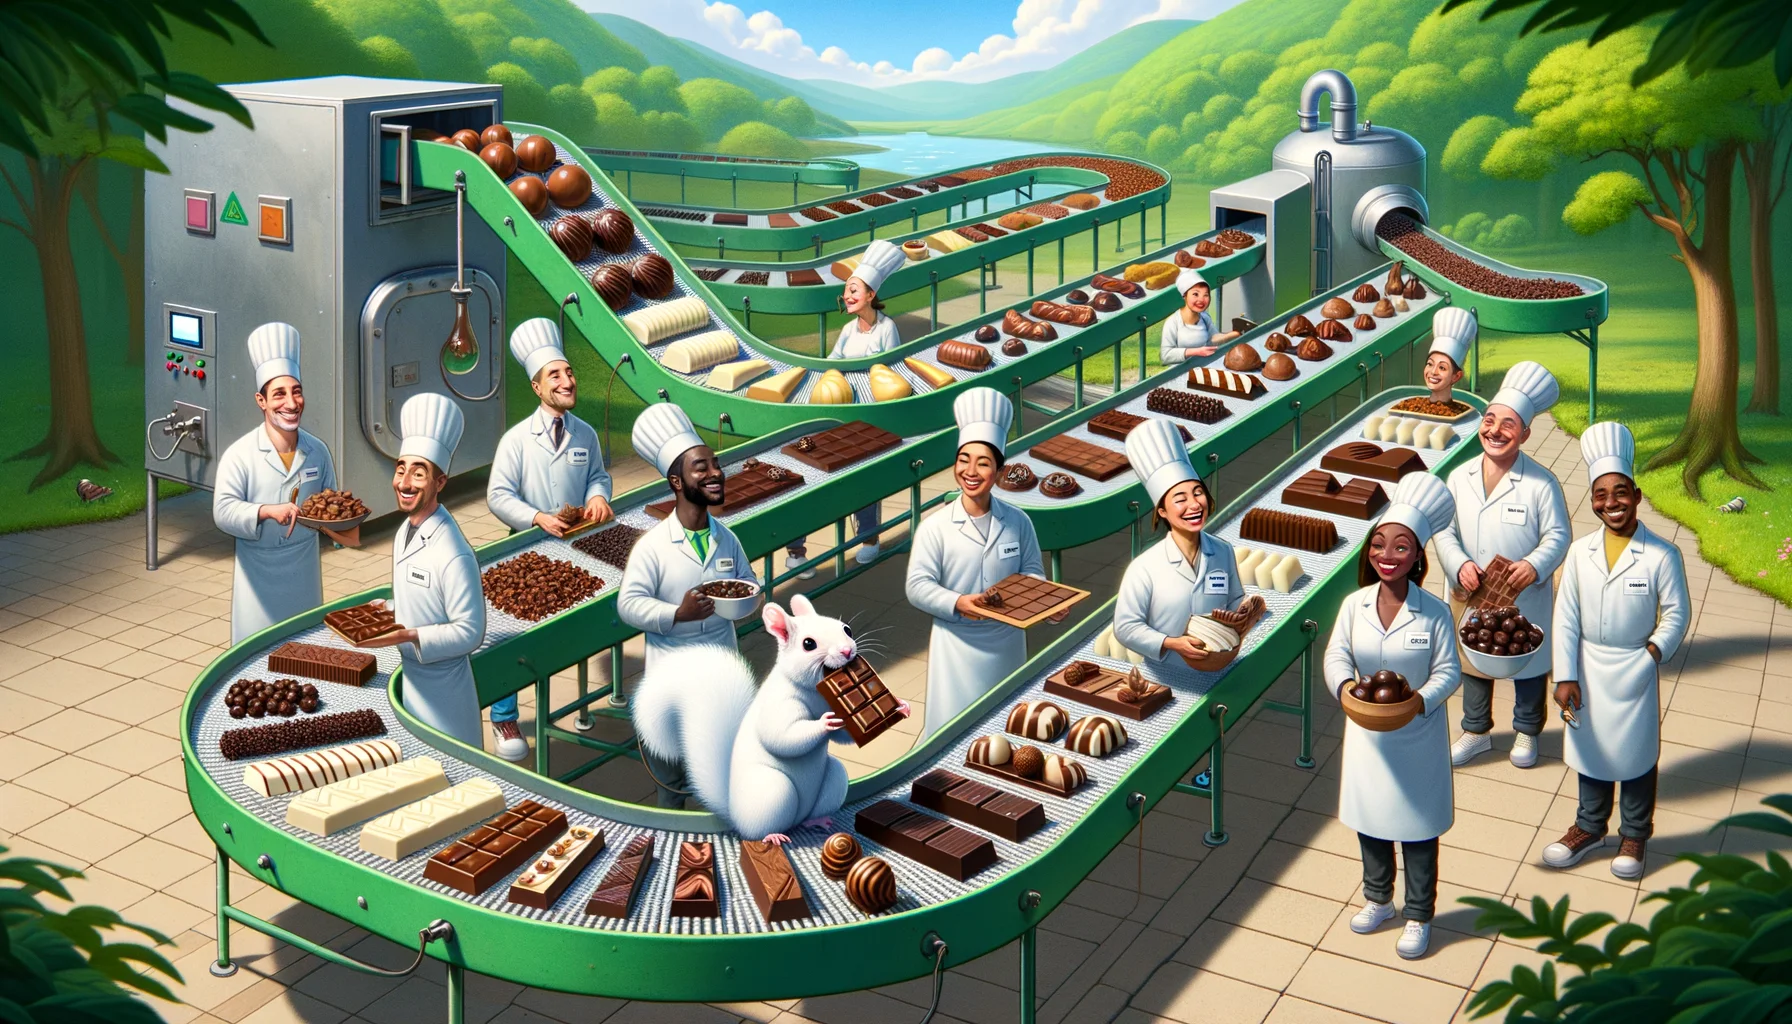 A humorous scene set in a perfect world for vegans. In this envisioned location, there are innovative chocolate-based solutions for every possible craving that a vegan might have. The image showcases a whimsical chocolate factory is in the background, with conveyor belts running high with a variety of different shaped and sized vegan chocolates. The chocolates are made from all-natural, plant-based ingredients, mirrored by surrounding lush greenery. Friendly factory workers of different descents, including Caucasian, Hispanic, and South Asian, joyously produce and taste-test the chocolate. An amusing sight: a white-furred squirrel, wearing a chef's hat, nibbling on a chunk of vegan chocolate, humorously signifies the purity and naturalness of the chocolate.